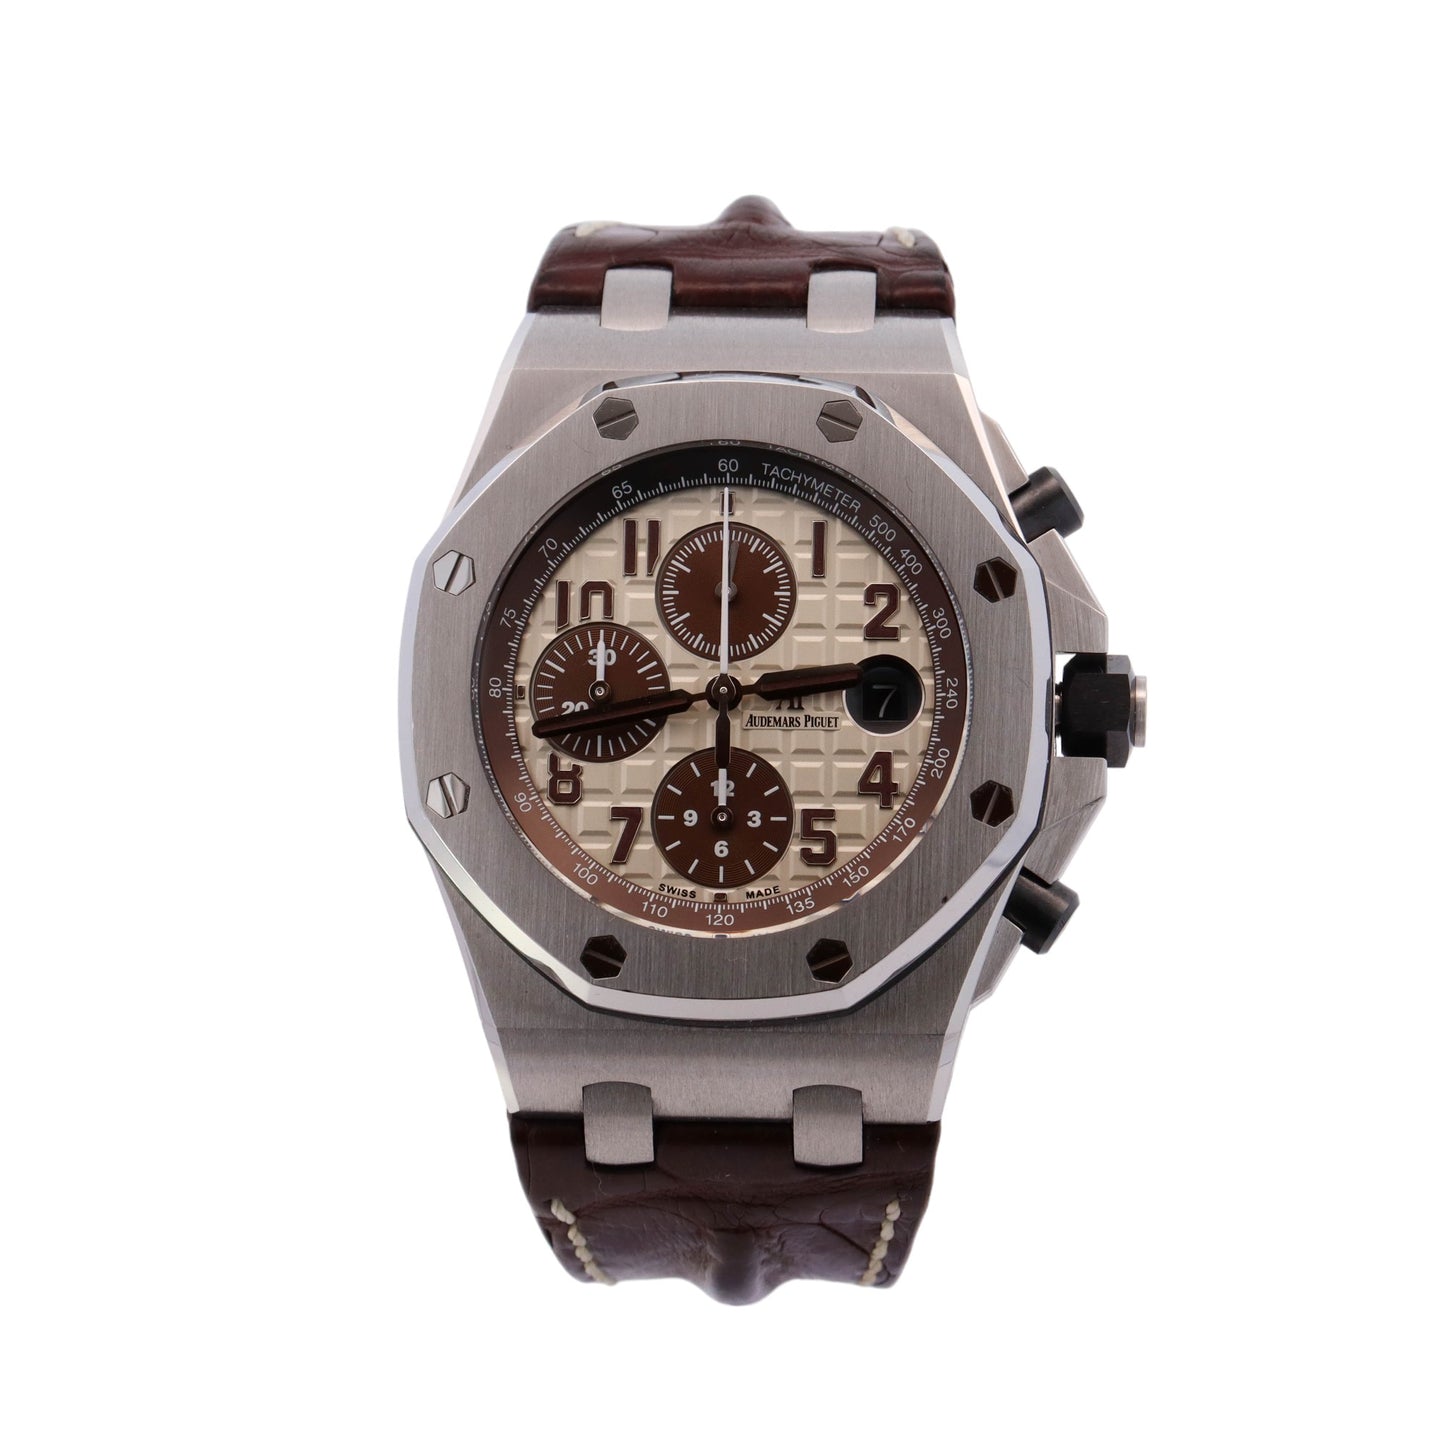 Audemars Piguet Royal Oak Offshore Stainless Steel 42mm Brown and Tan Chronograph Dial Watch Reference# 26470ST.OO.A801CR.01 - Happy Jewelers Fine Jewelry Lifetime Warranty